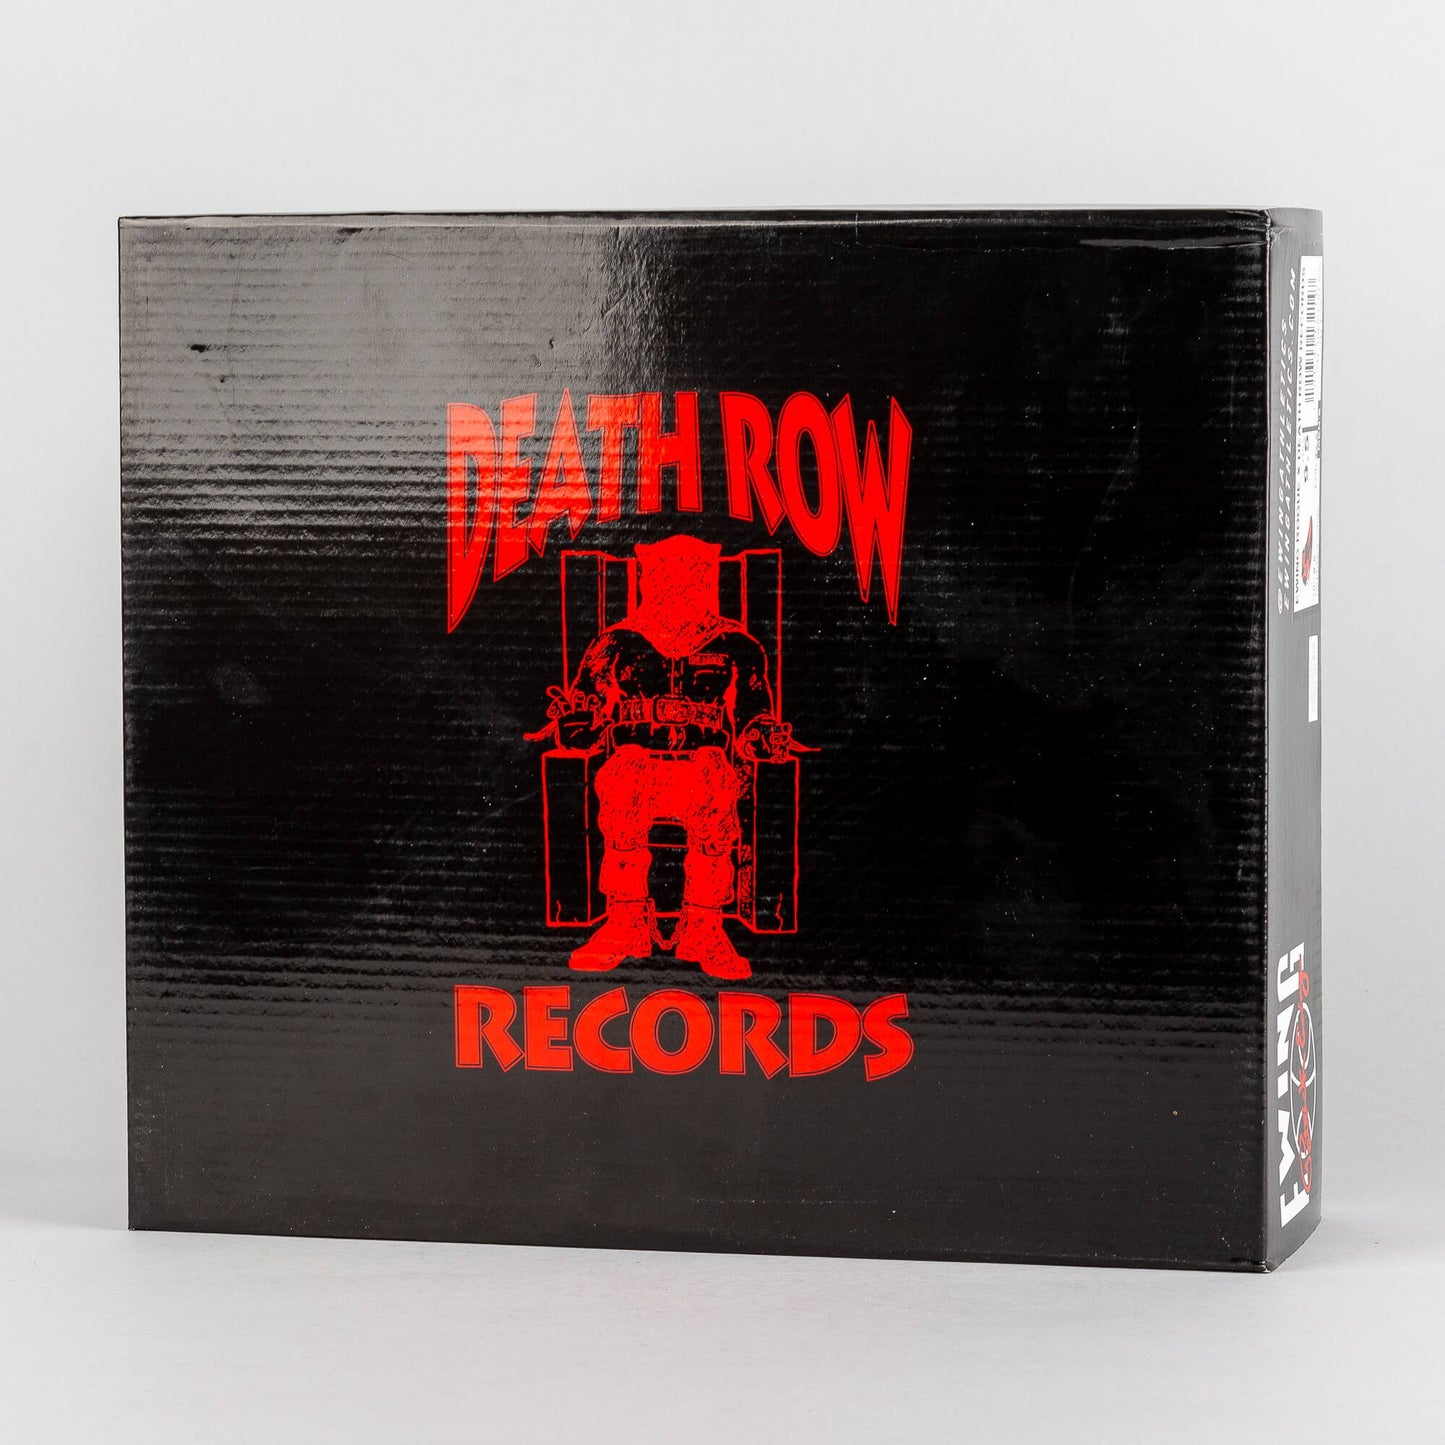 Ewing Rogue X Death Row Records Red/Black/White